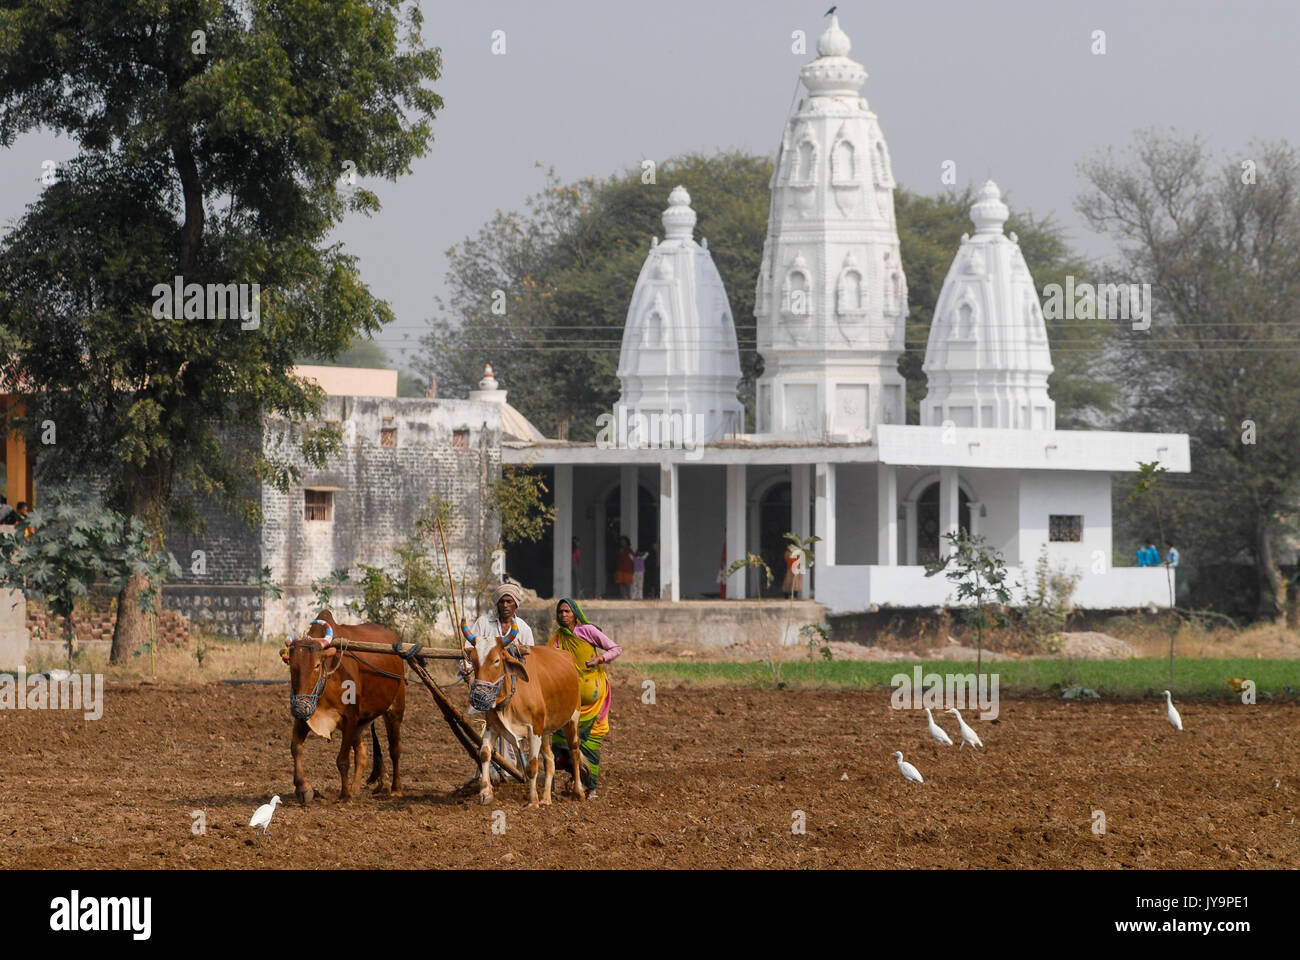 INDIA, Madhya Pradesh, farmer, man and woman, plowing field with cows infront of Hindu temple Stock Photo